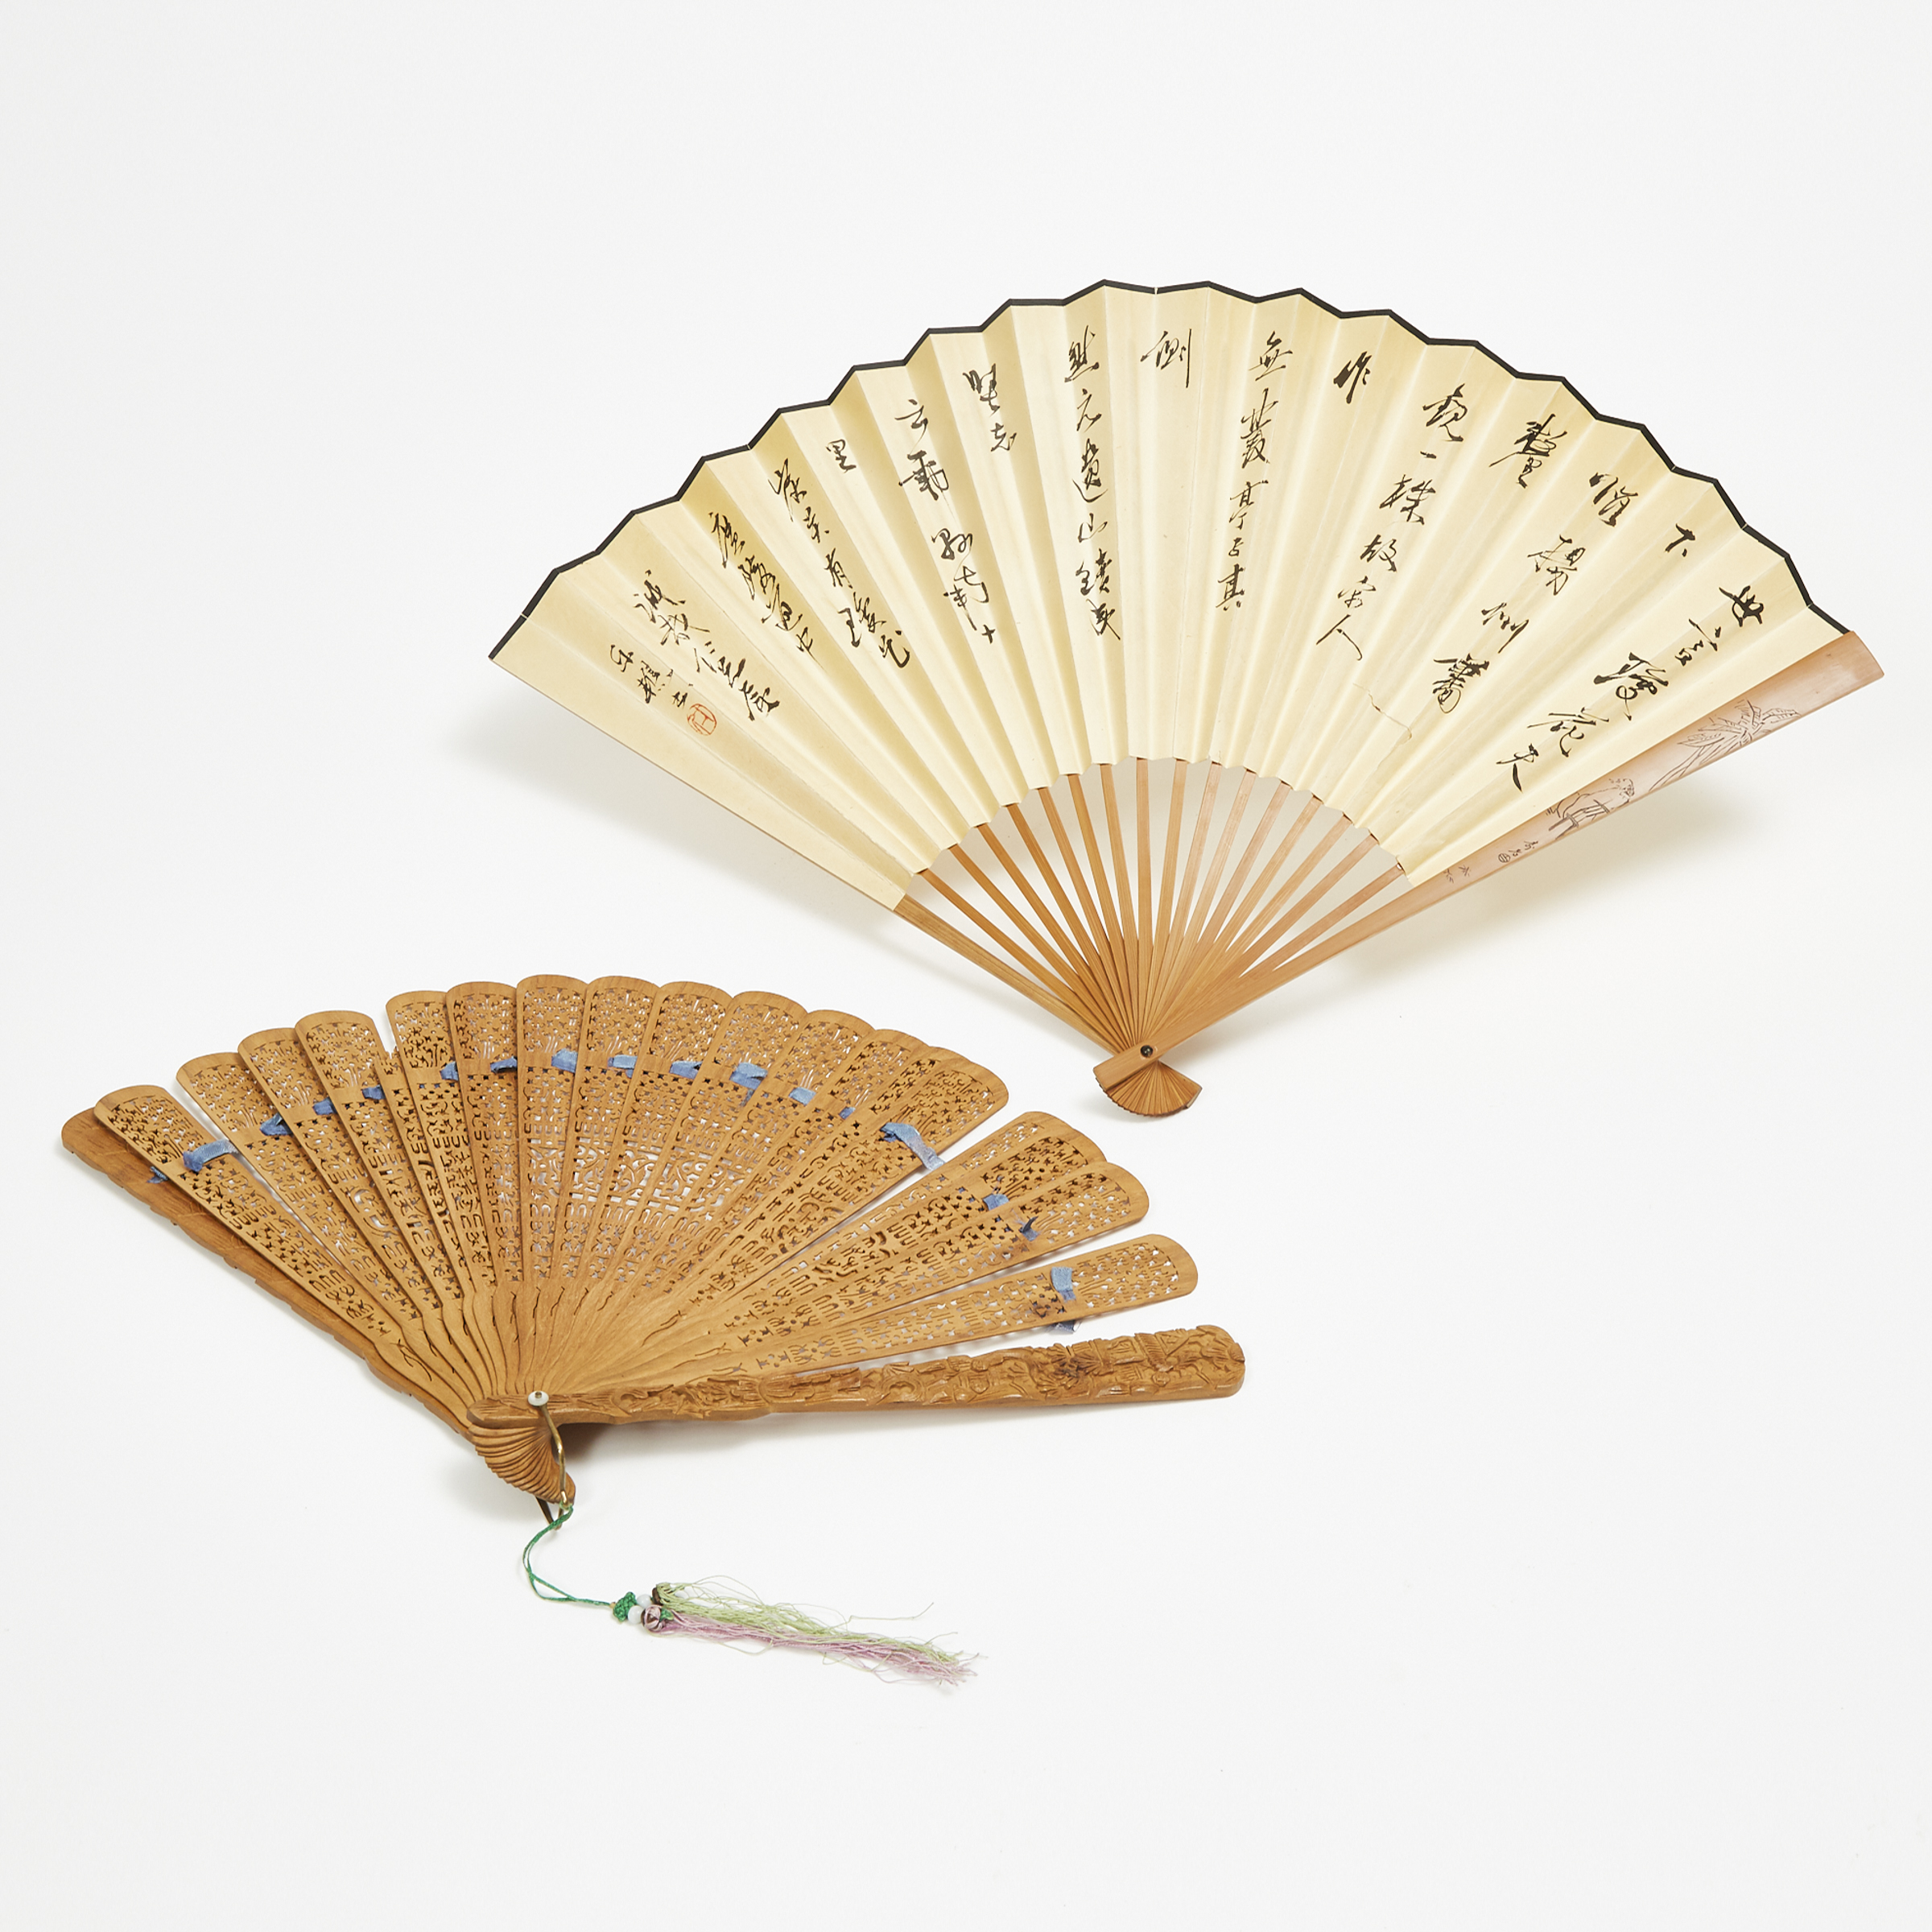 A Calligraphy and River Landscape Fan Painting, together with a Carved Wood Folding Fan